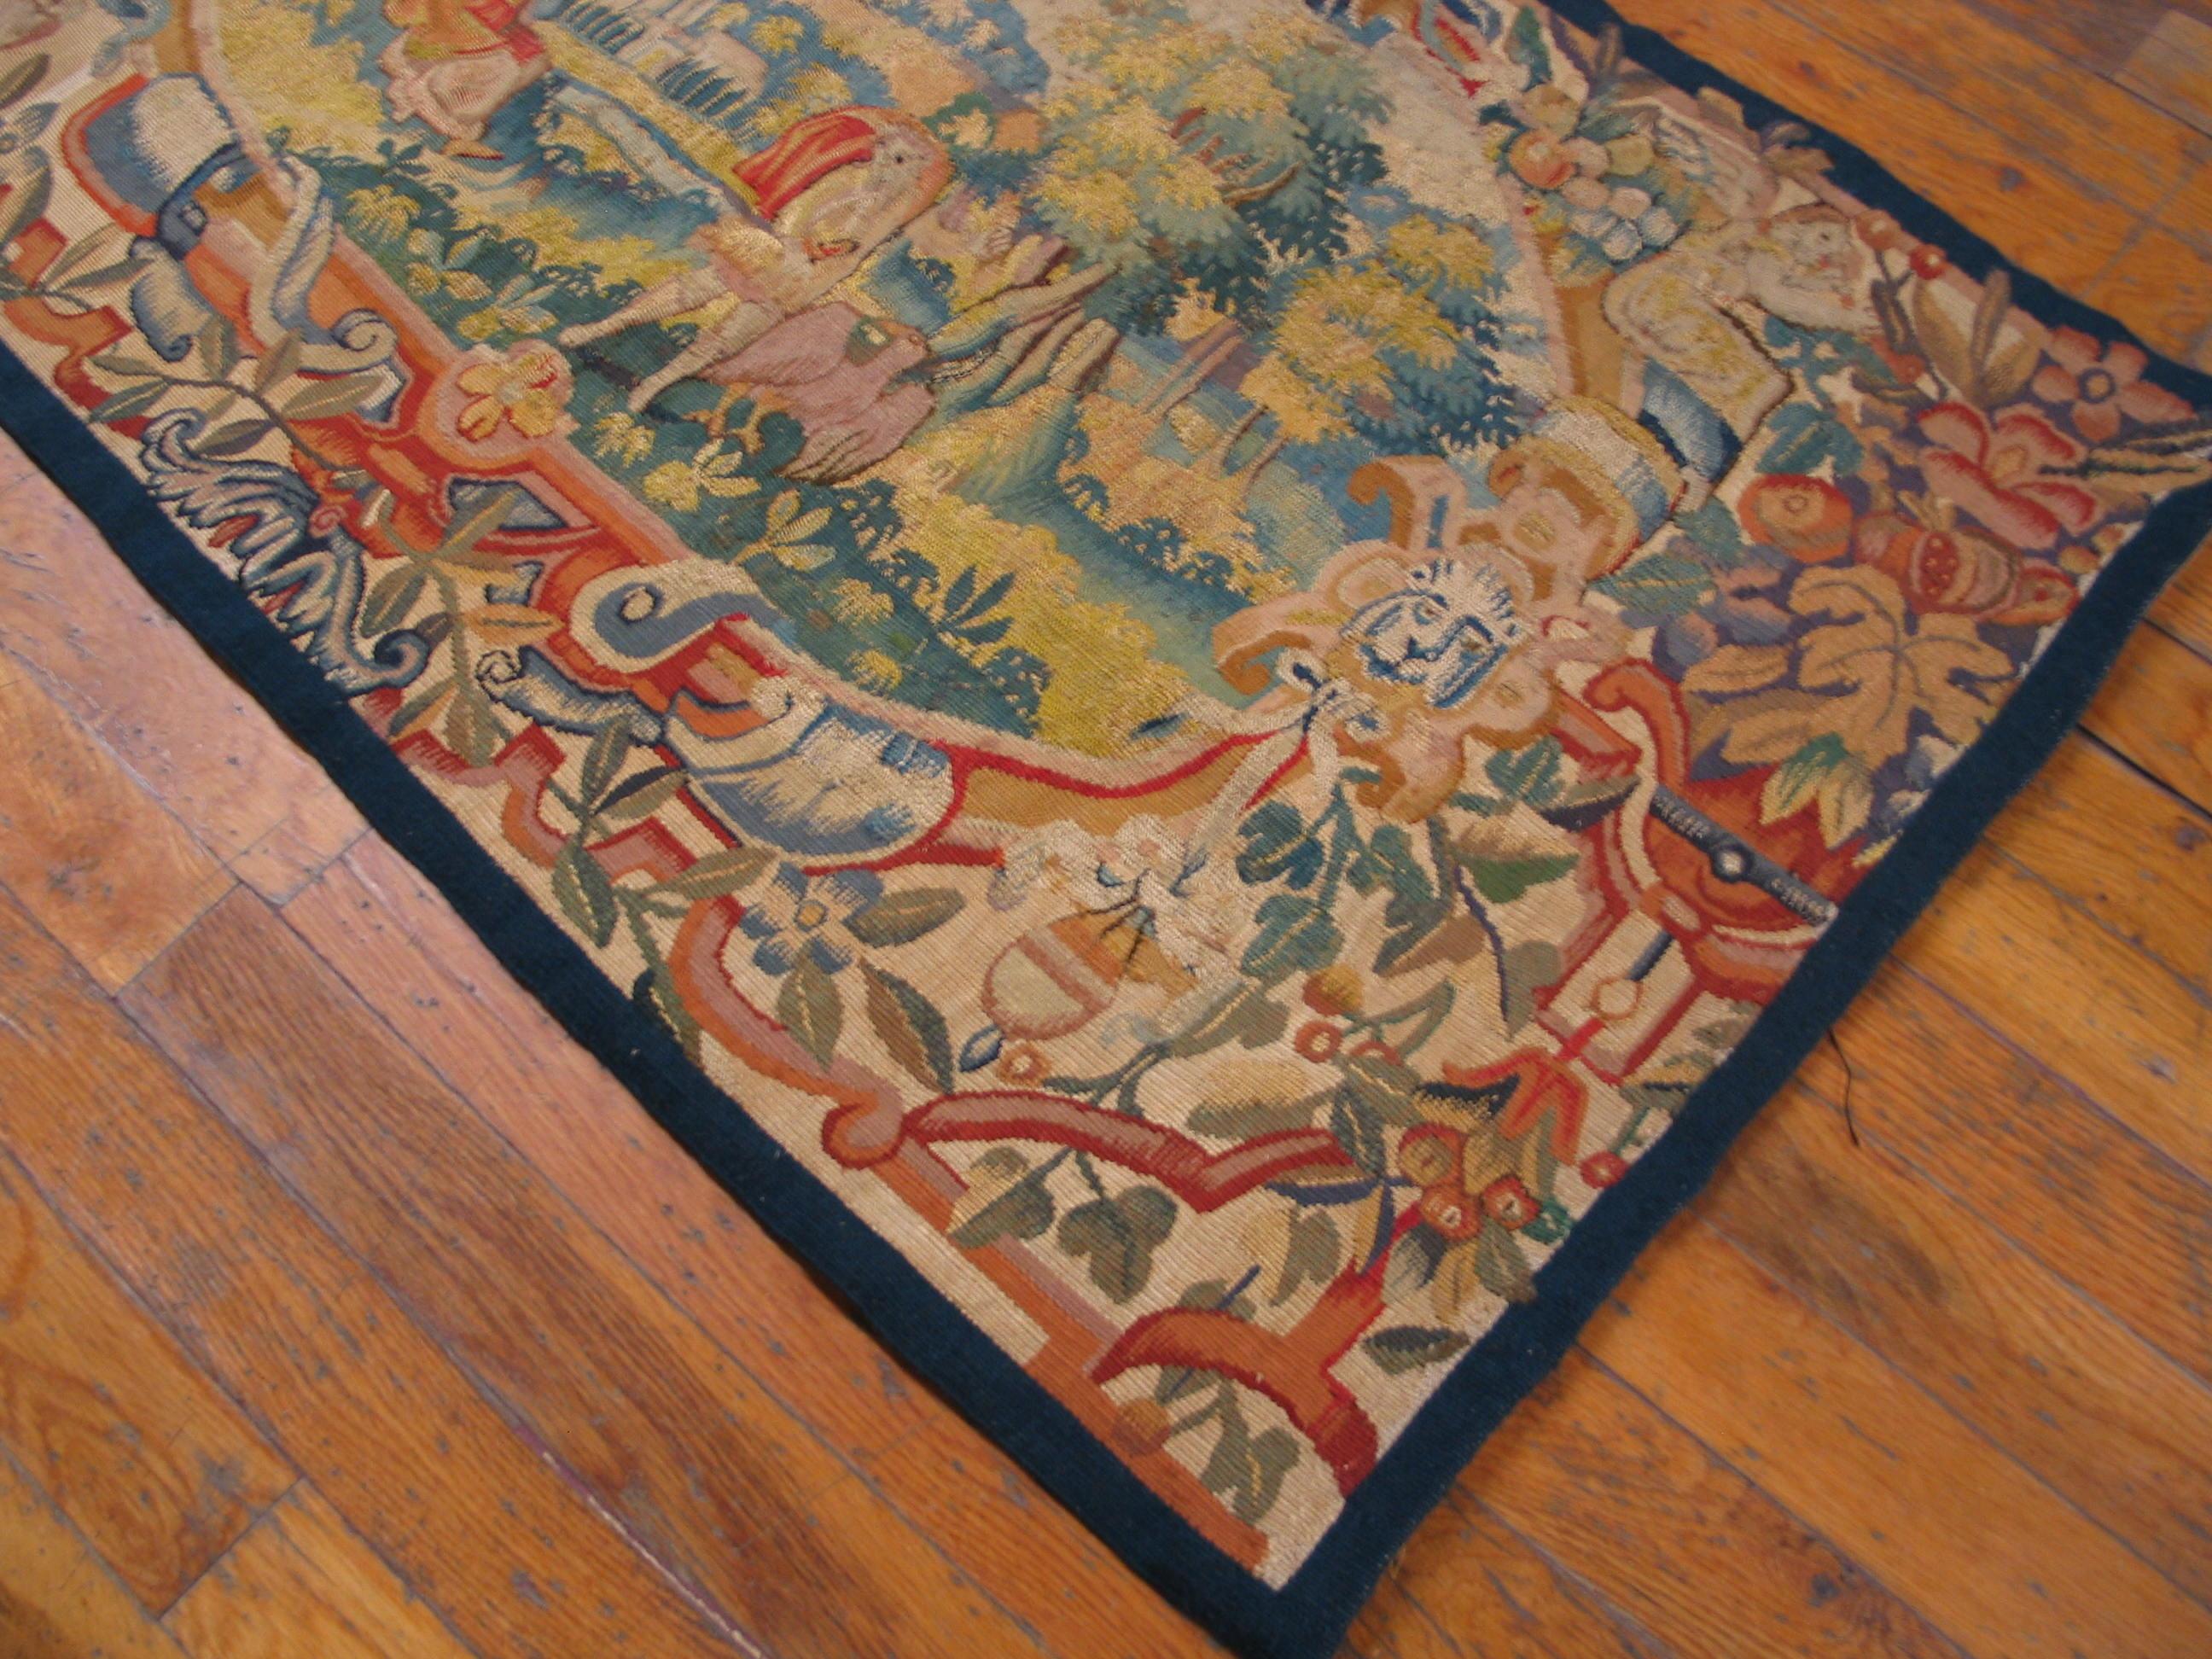 Hand-Woven 17th Century Pair of Flemish Tapestry ( 2' x 3'4